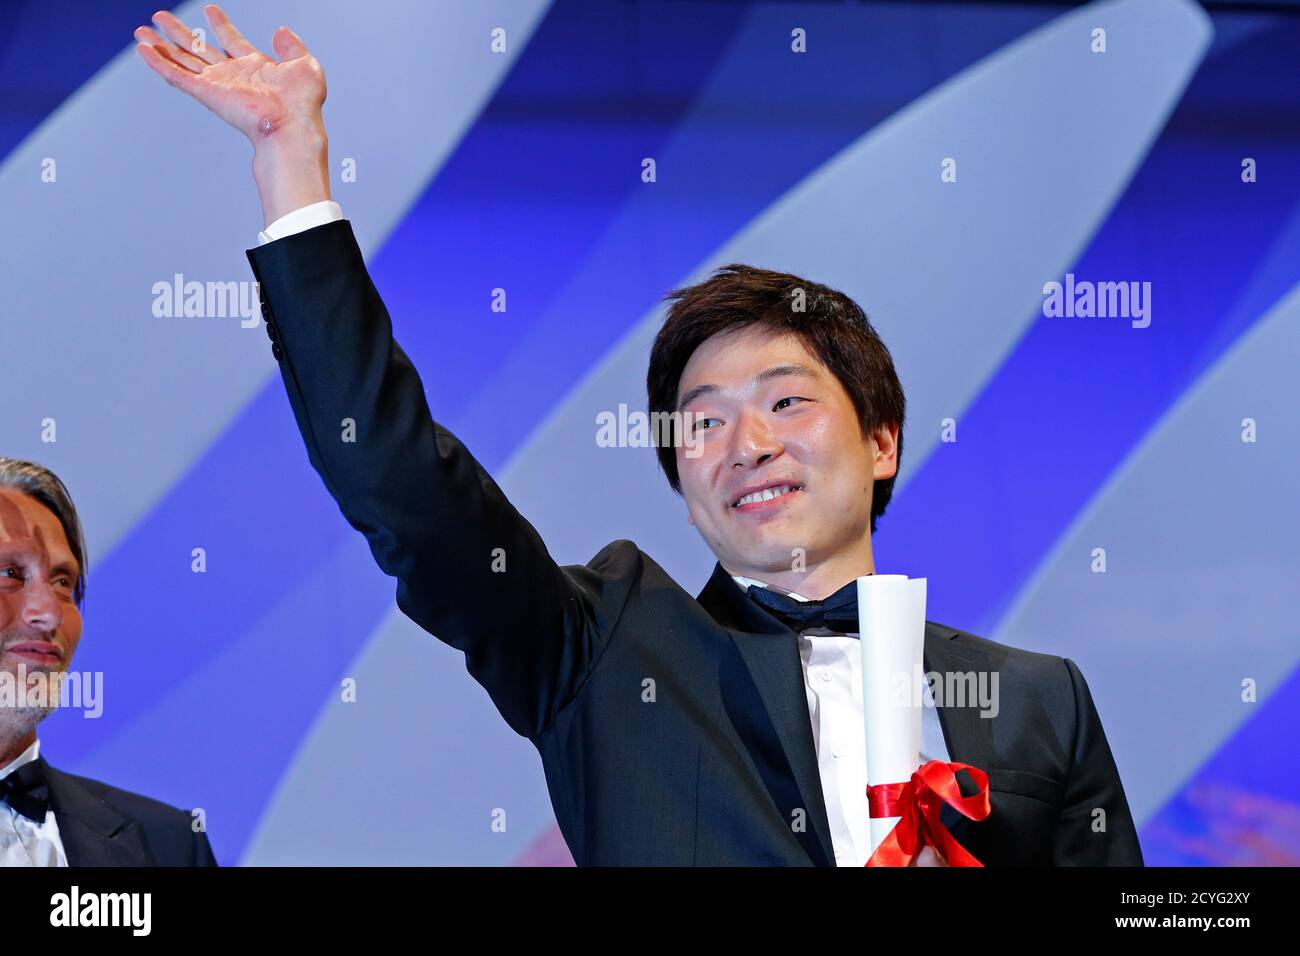 Director Moon Byoung-Gon, Short film Palme d'Or award winner for the film " Safe", celebrates on stage after being awarded during the closing ceremony  of the 66th Cannes Film Festival in Cannes May